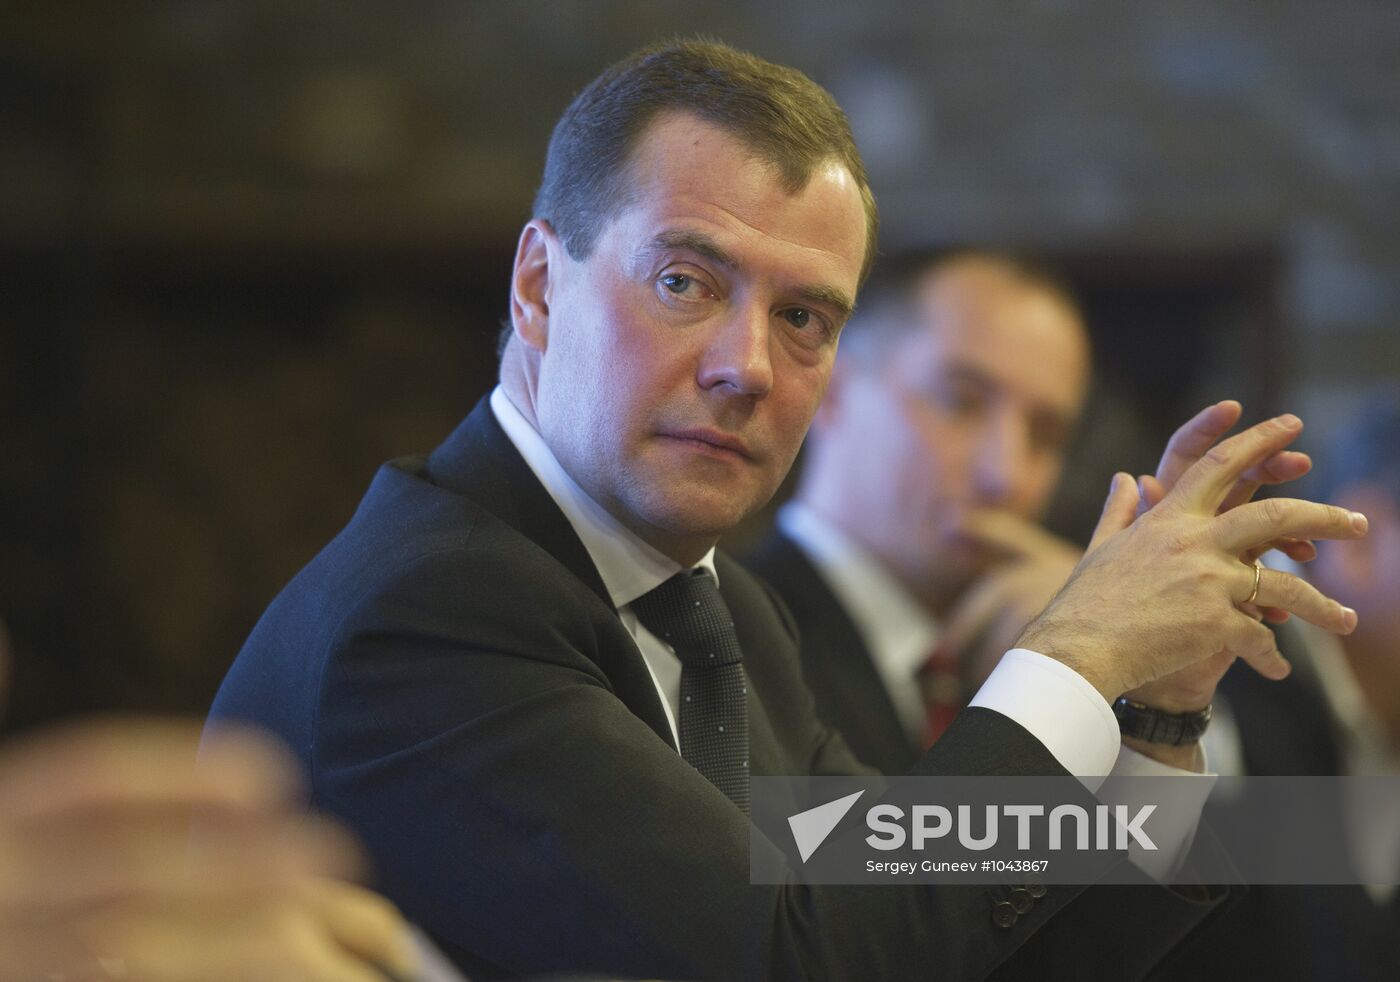 Dmitry Medvedev meets non-registered party leaders